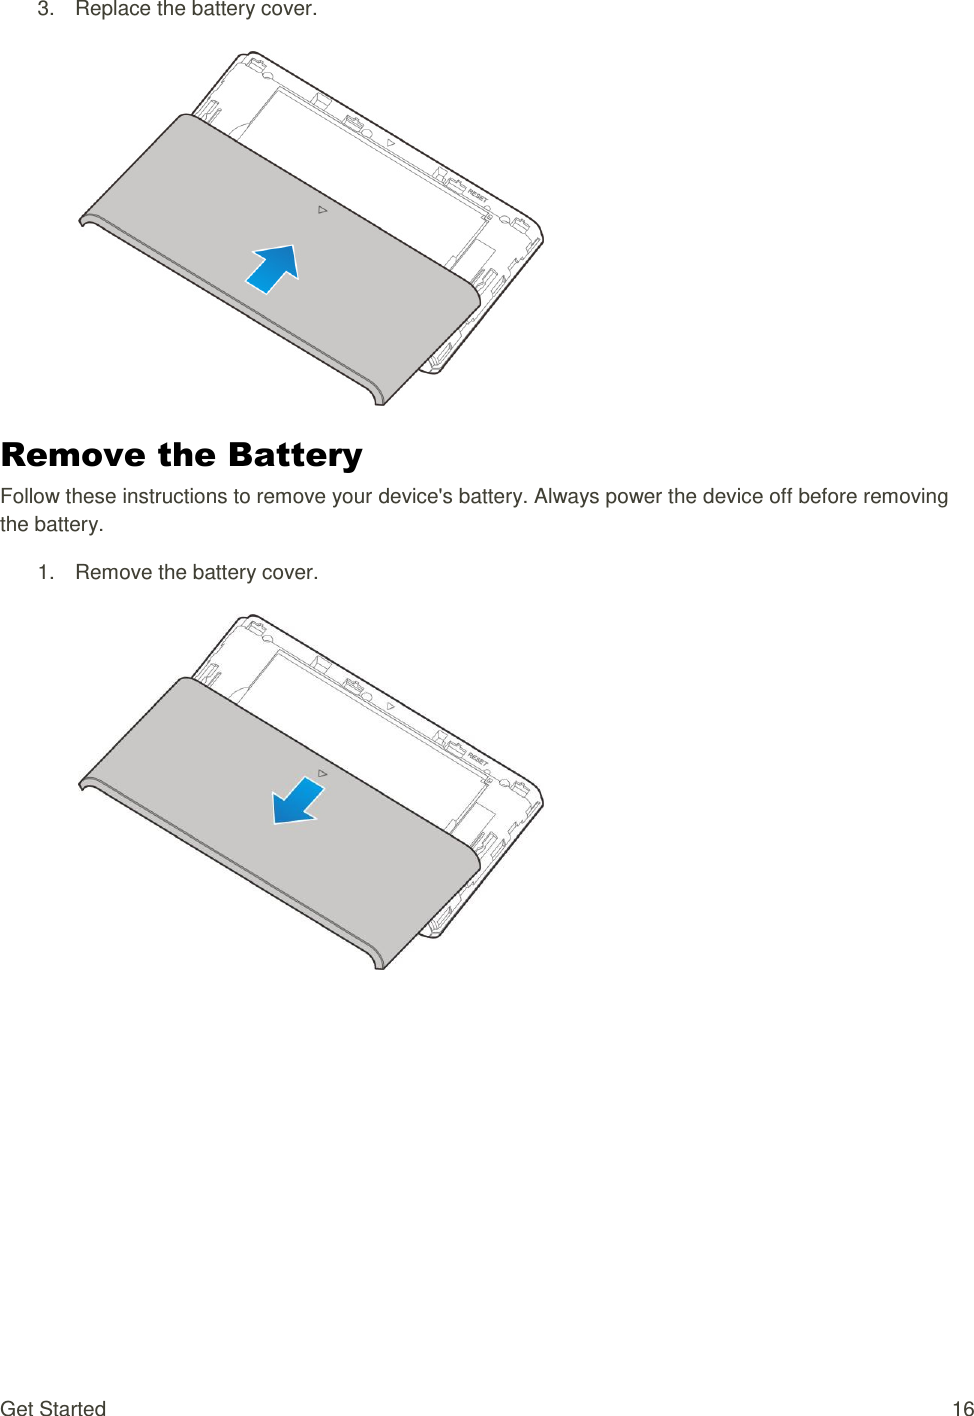 Get Started  16 3.  Replace the battery cover.    Remove the Battery Follow these instructions to remove your device&apos;s battery. Always power the device off before removing the battery. 1.  Remove the battery cover.    